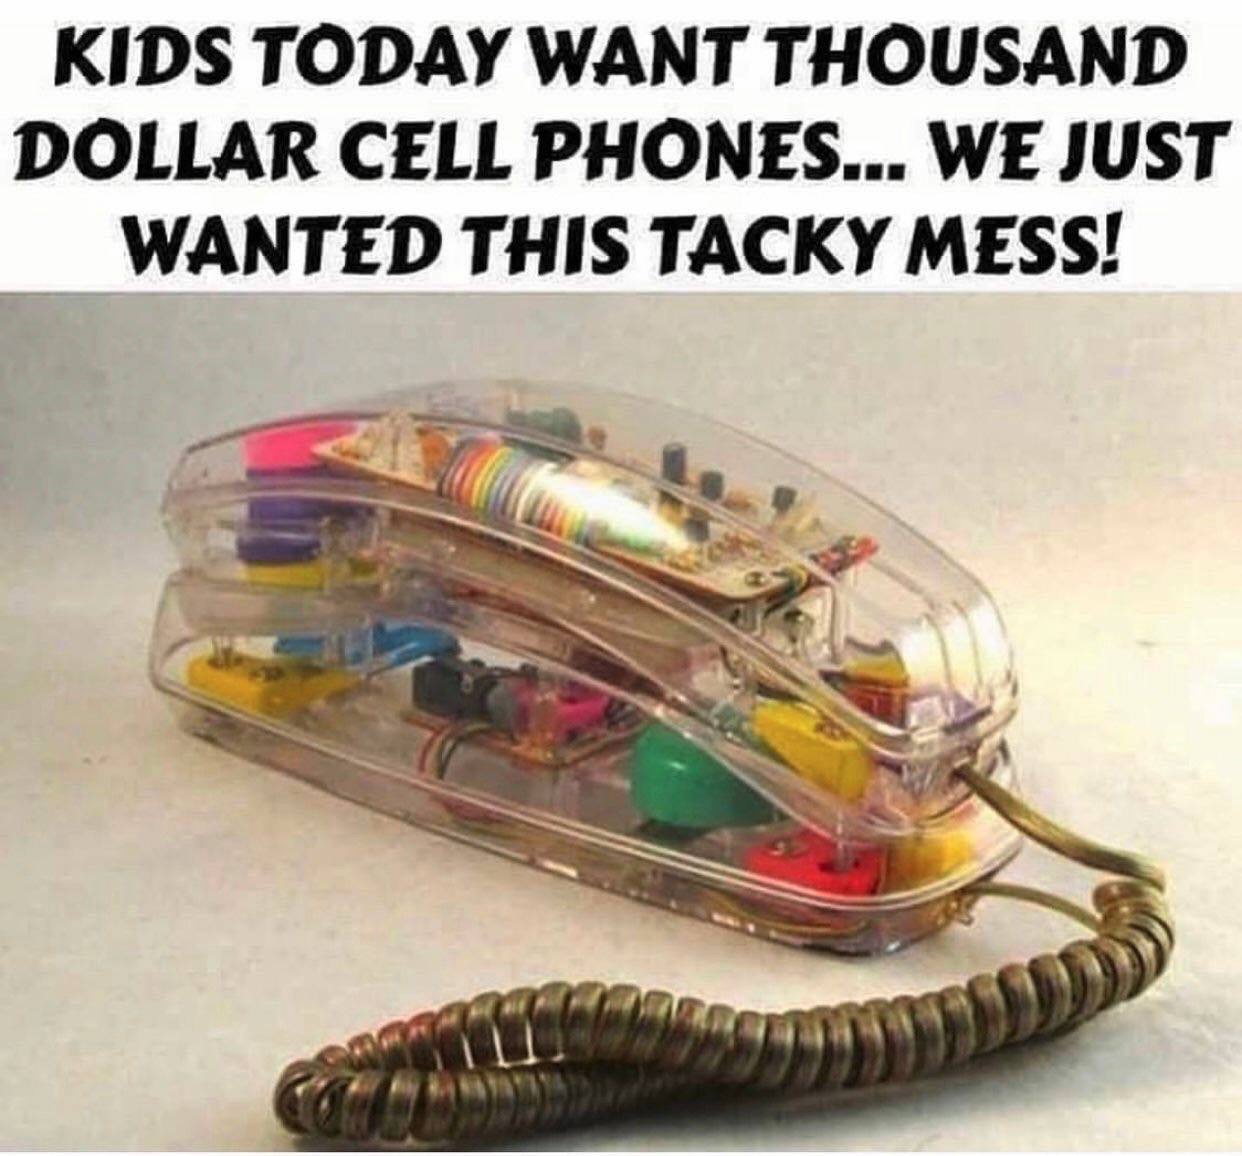 clear phone 90s - Kids Today Want Thousand Dollar Cell Phones... We Just Wanted This Tacky Mess!